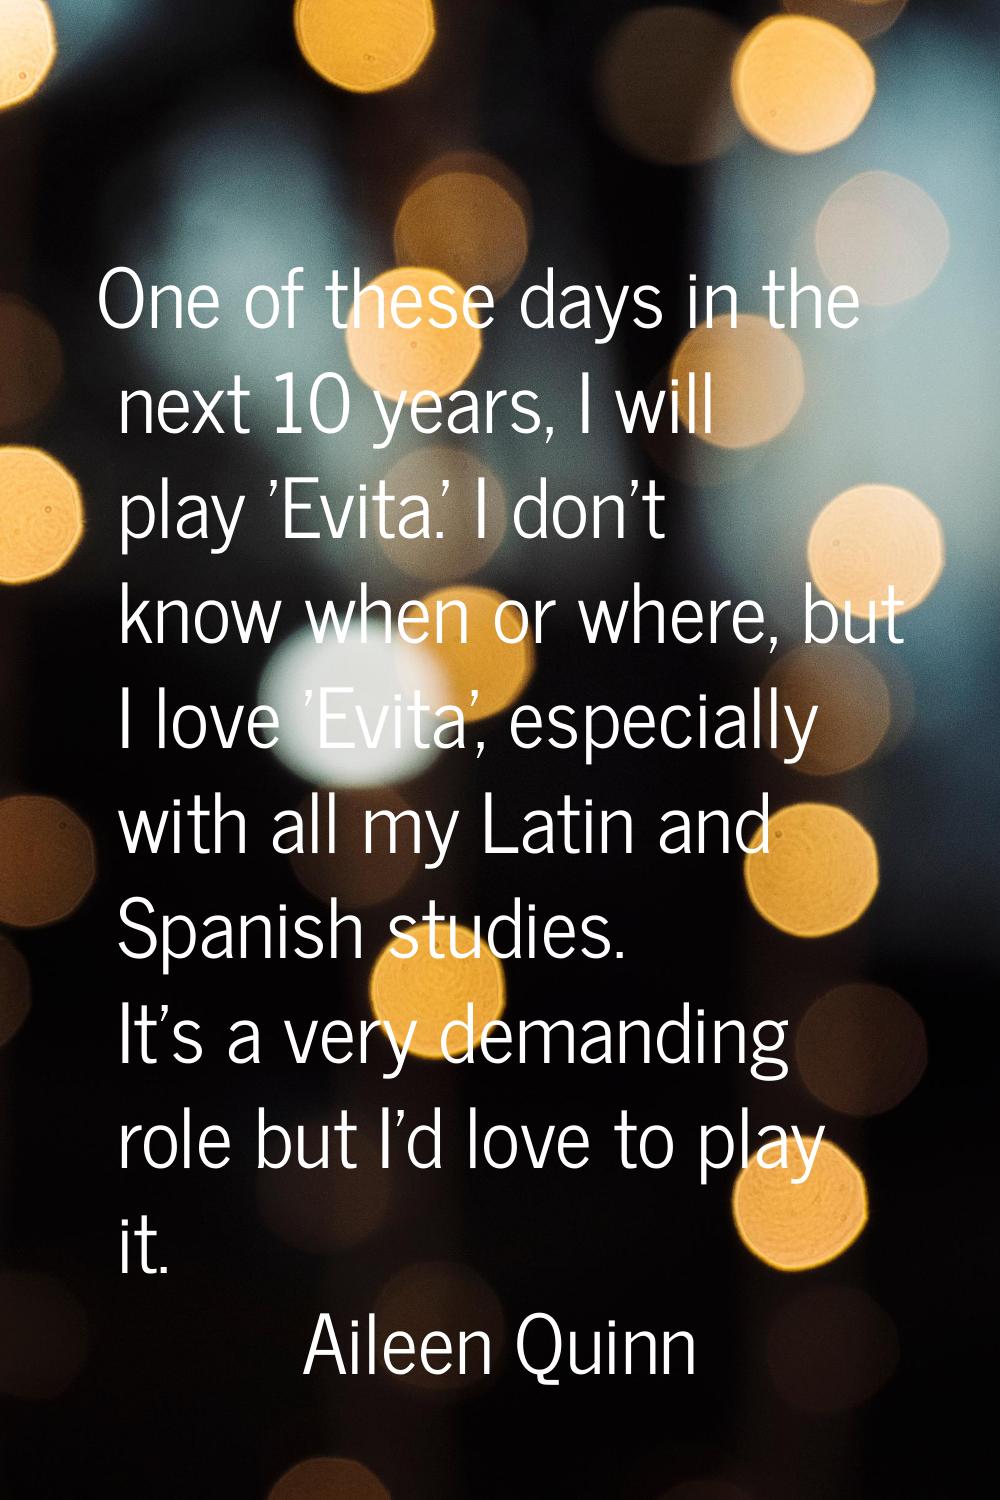 One of these days in the next 10 years, I will play 'Evita.' I don't know when or where, but I love